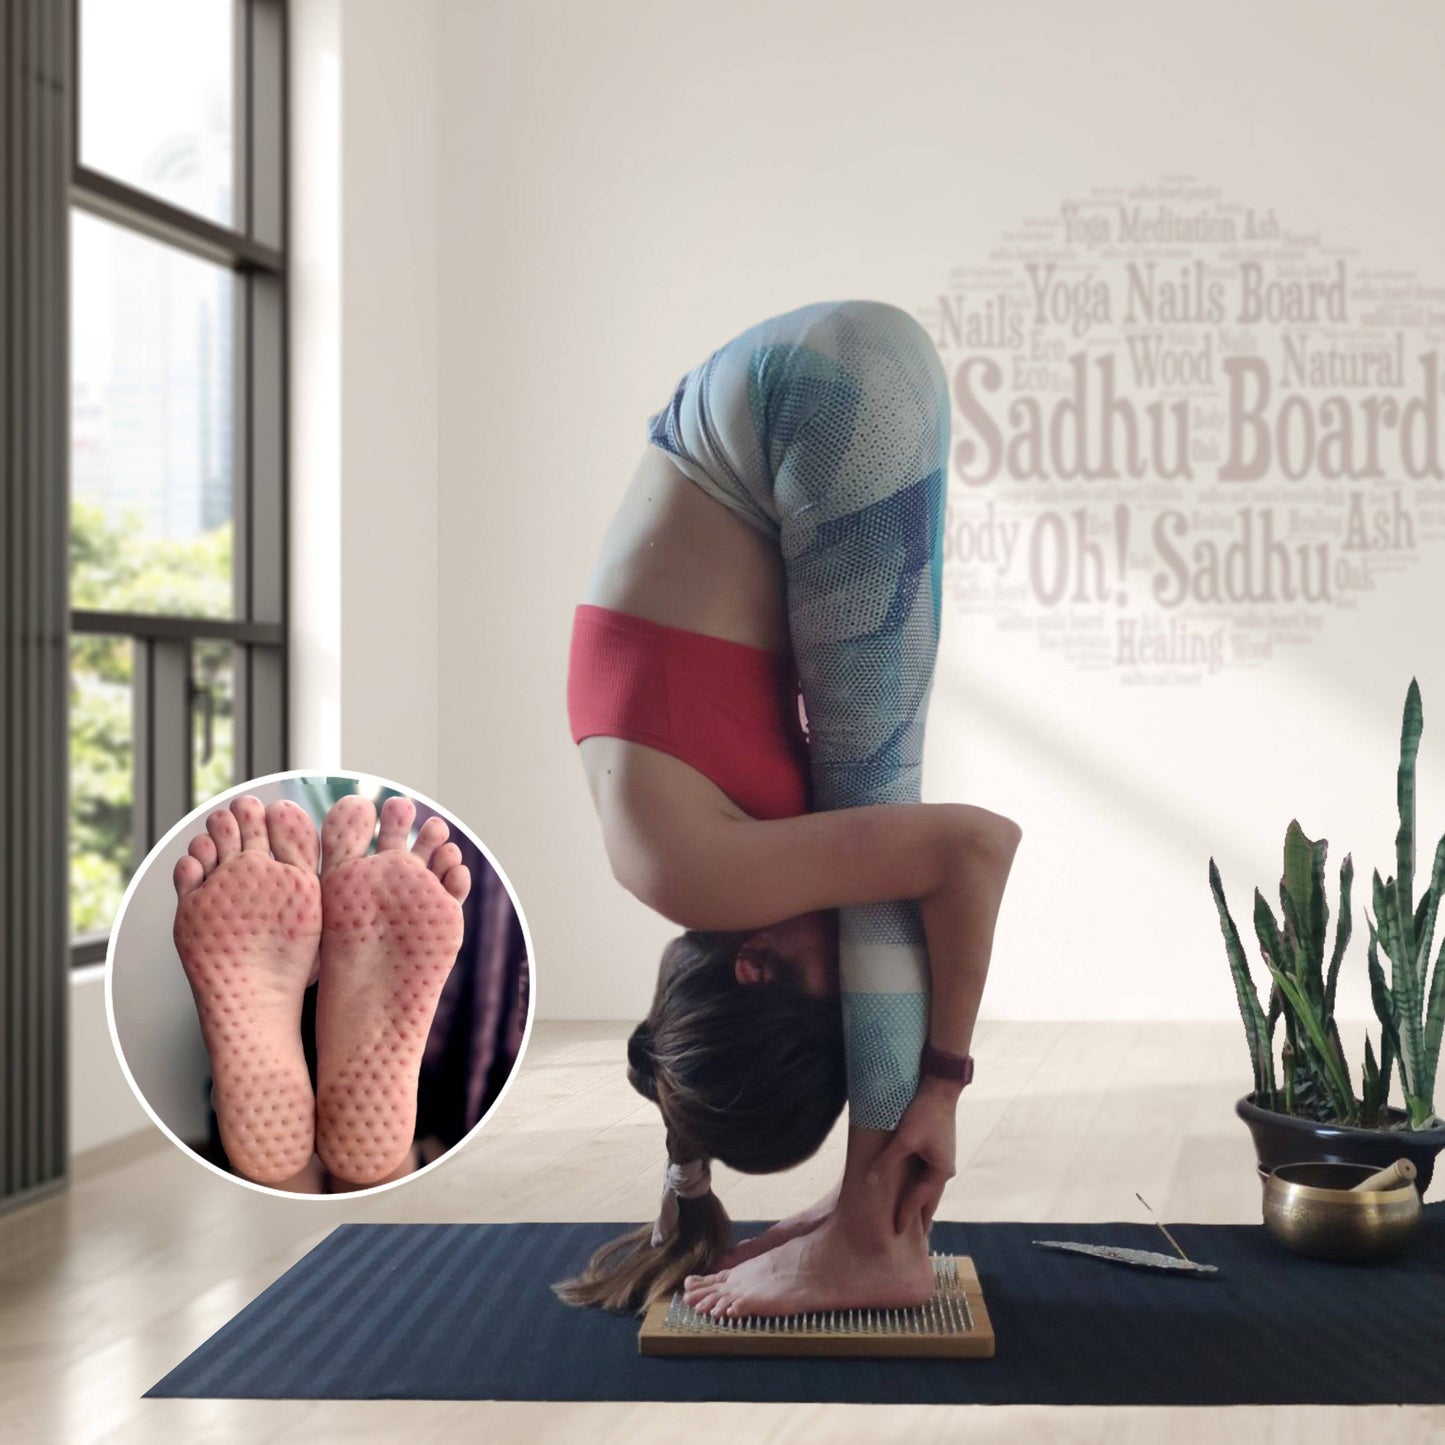 yoga girl in the room standing on wooden board with nails